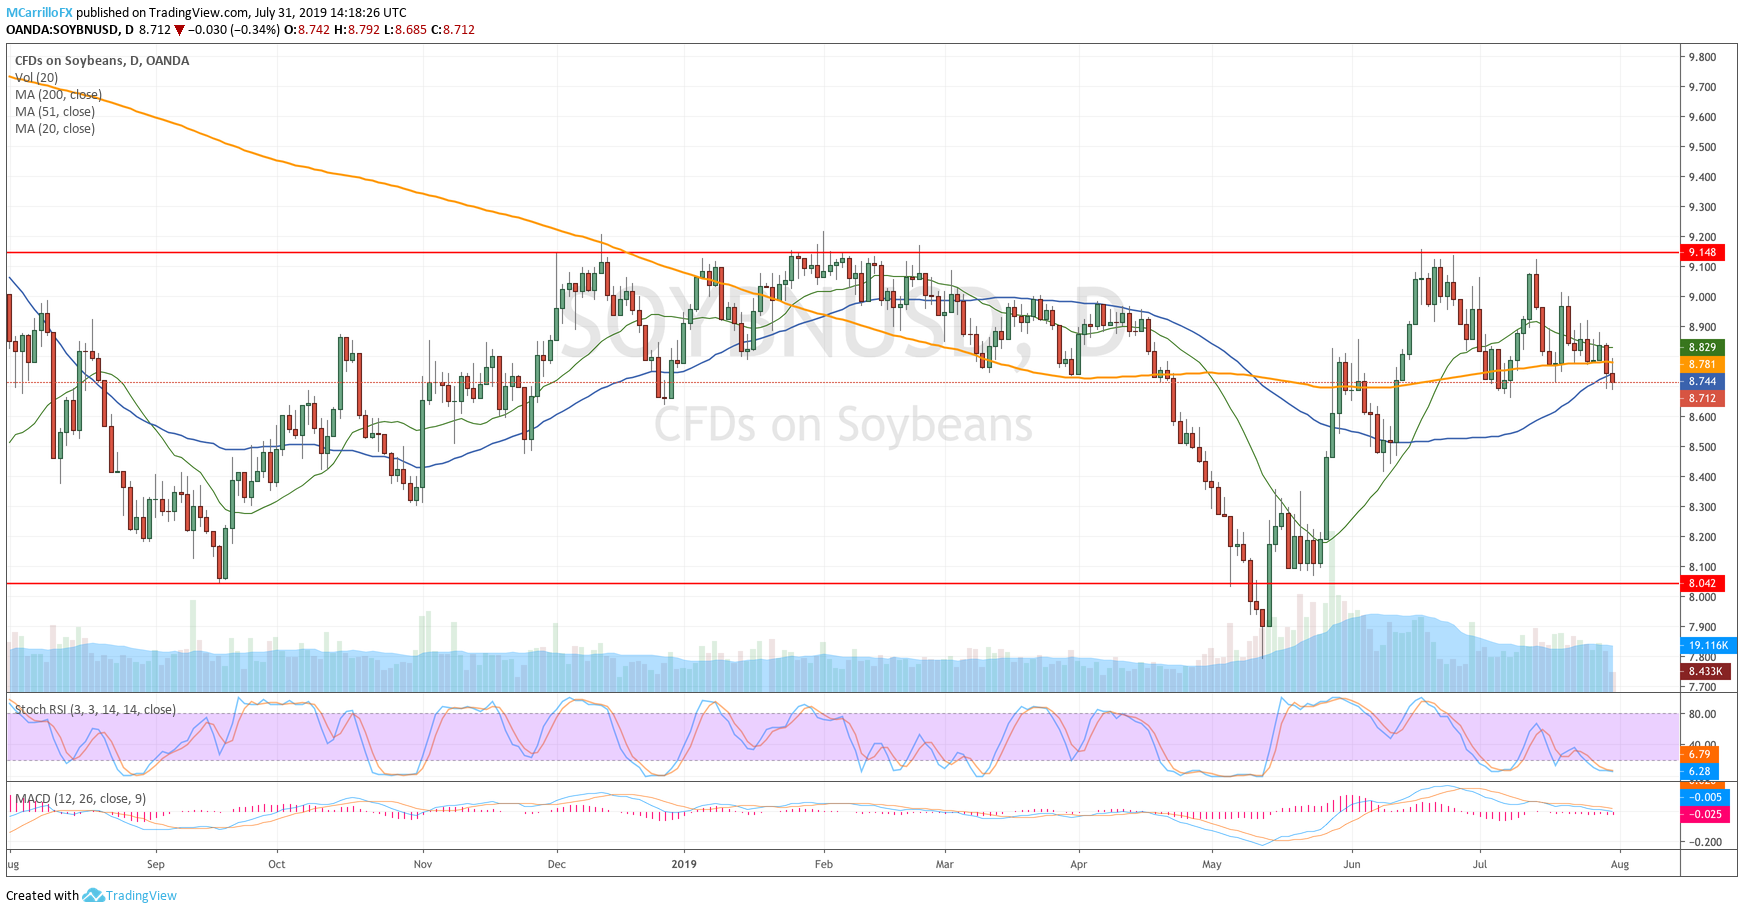 Price of Soybean daily chart July 31